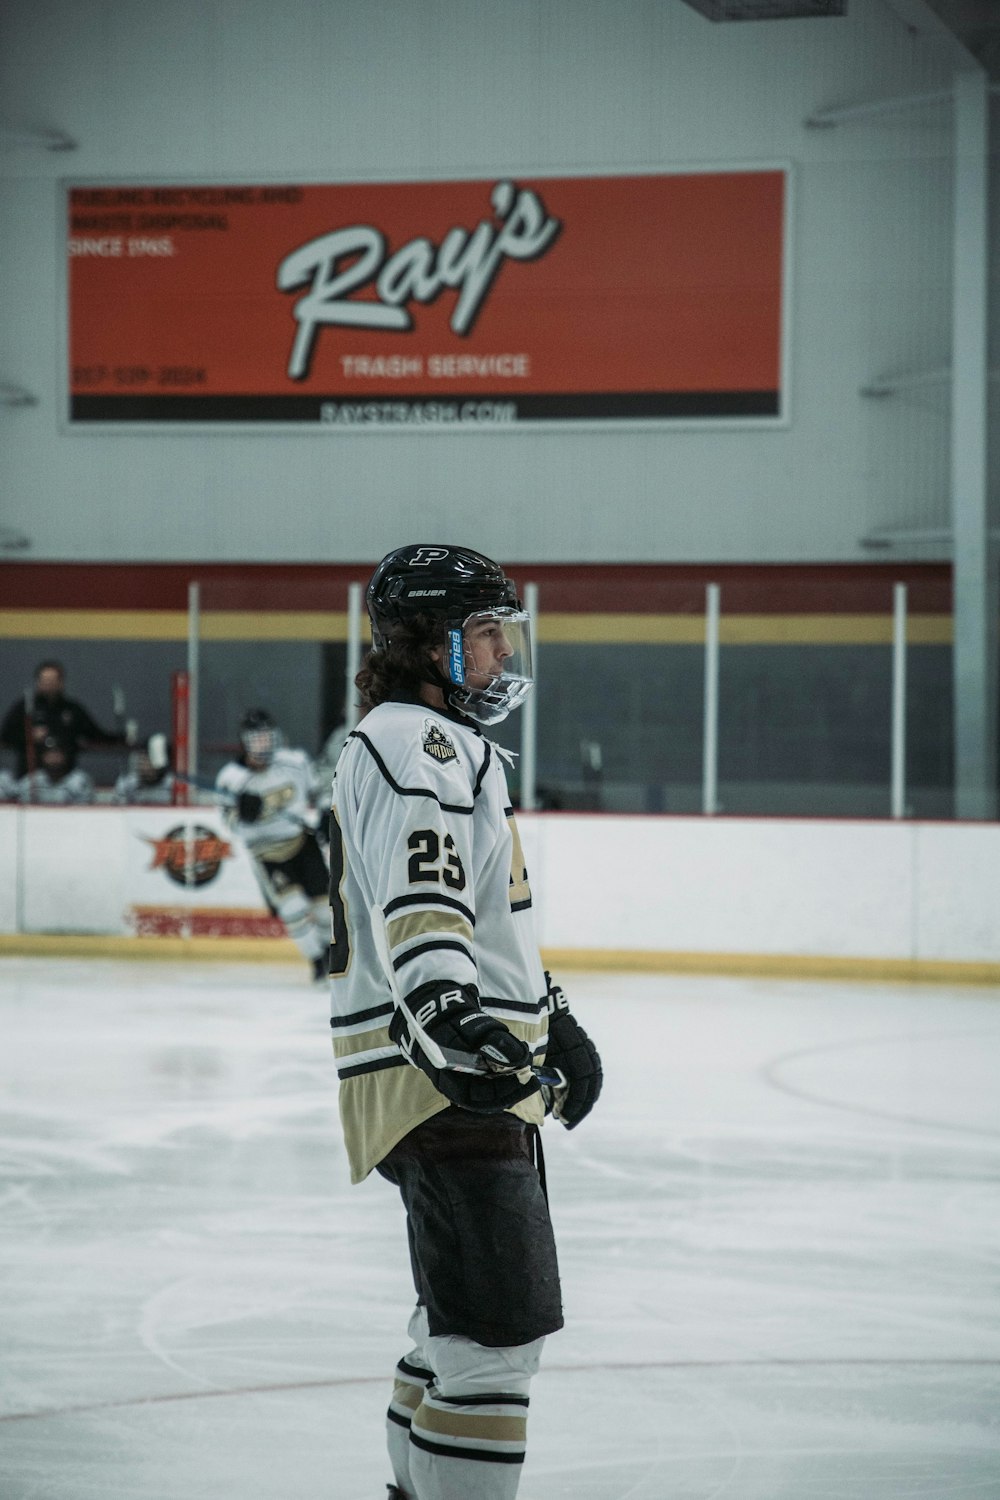 a hockey player is standing on the ice